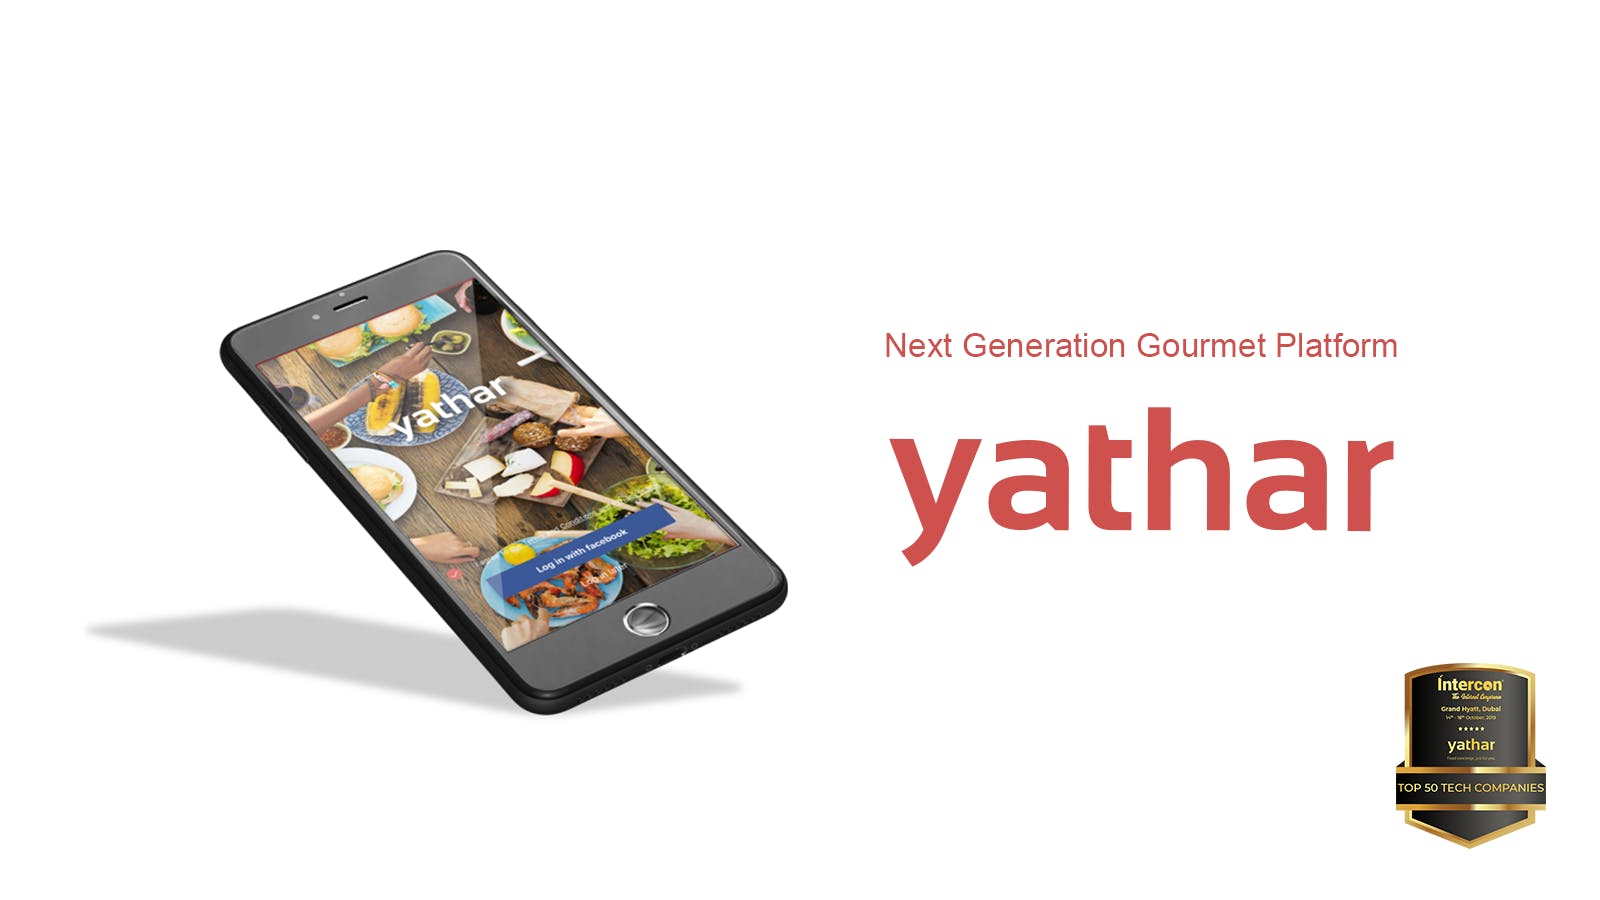 What is yathar?